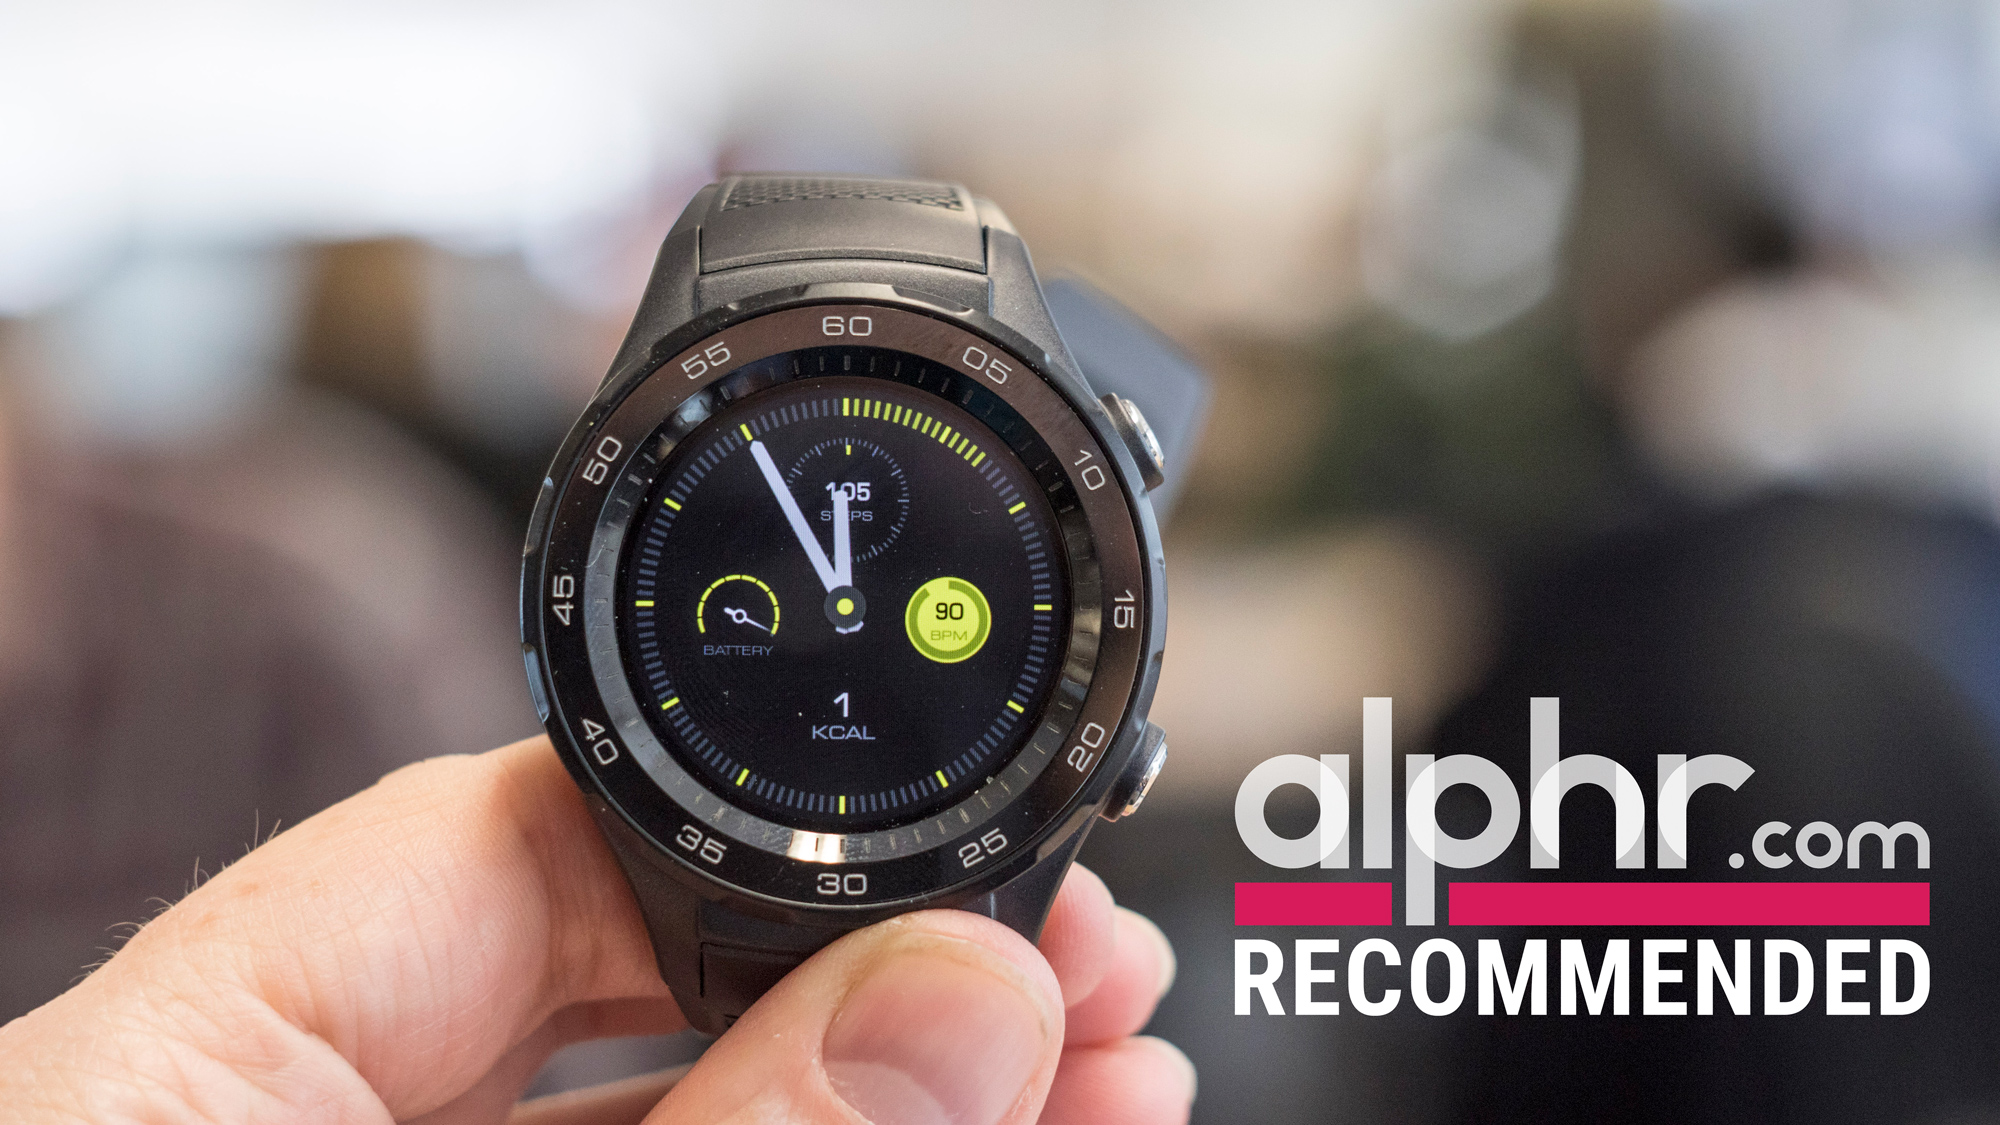 Indrømme kravle radiator Huawei Watch 2 review: A solid Android Wear smartwatch